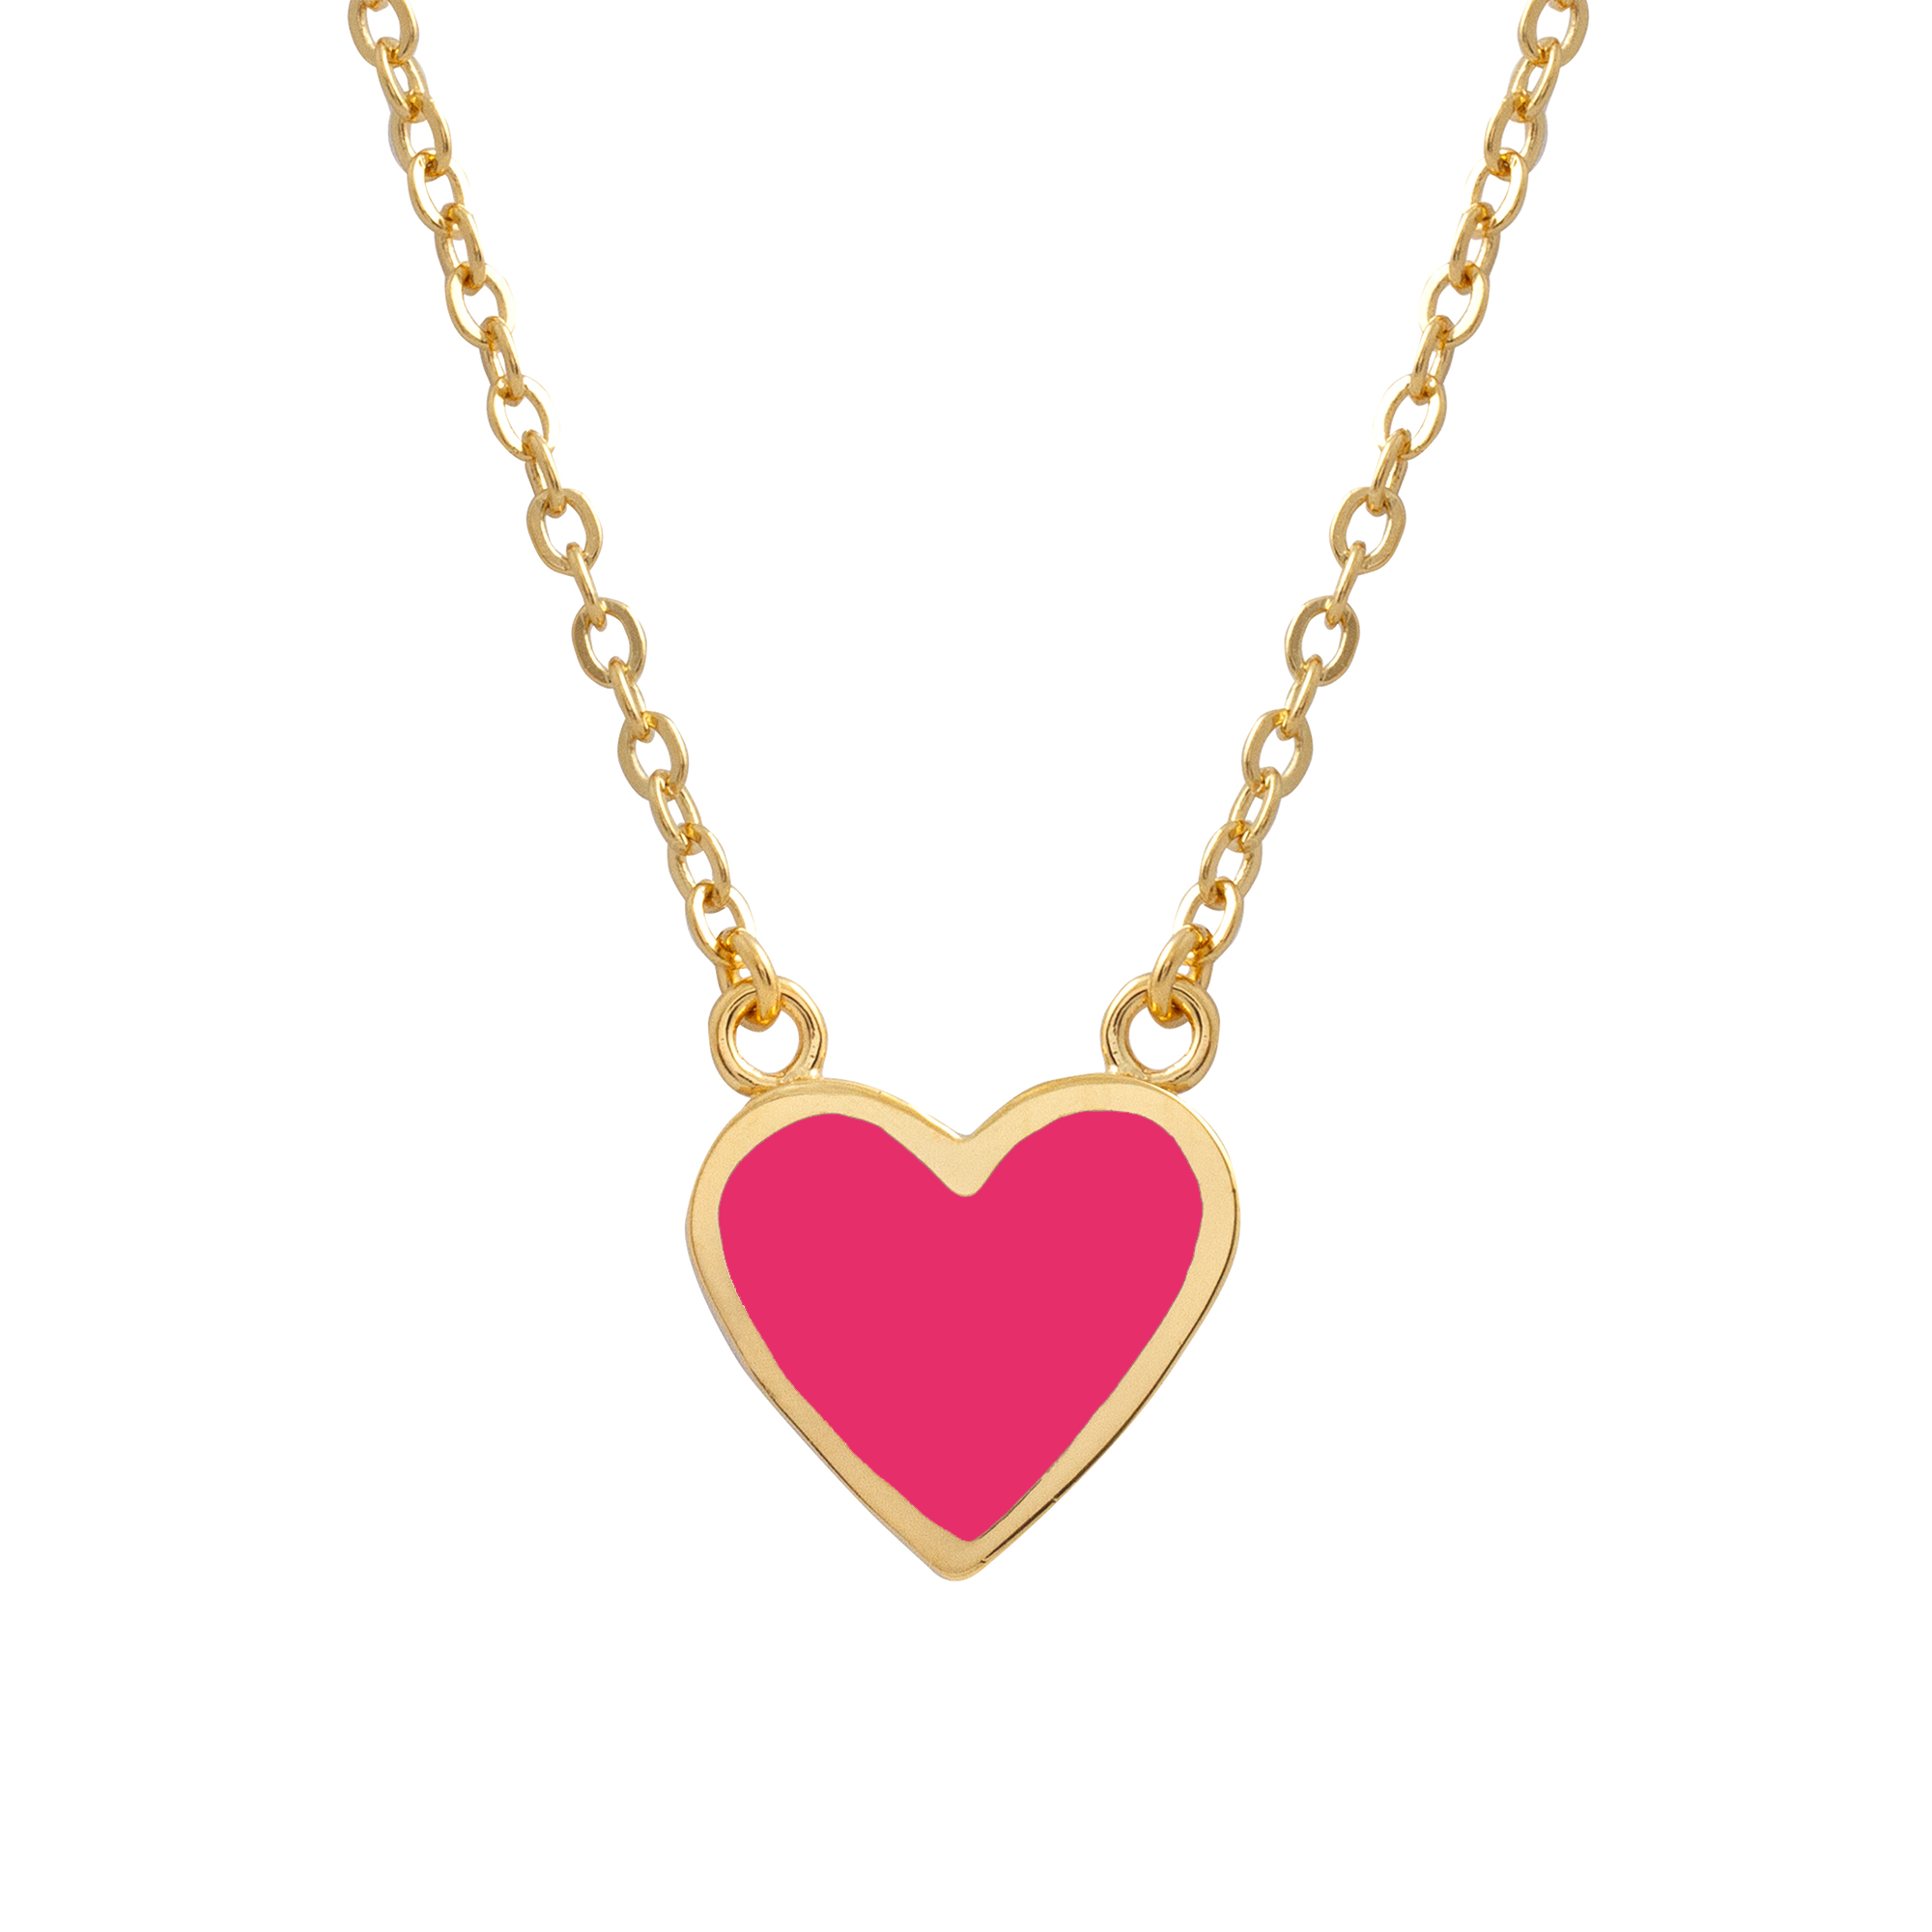 Heart Necklace Hot pink